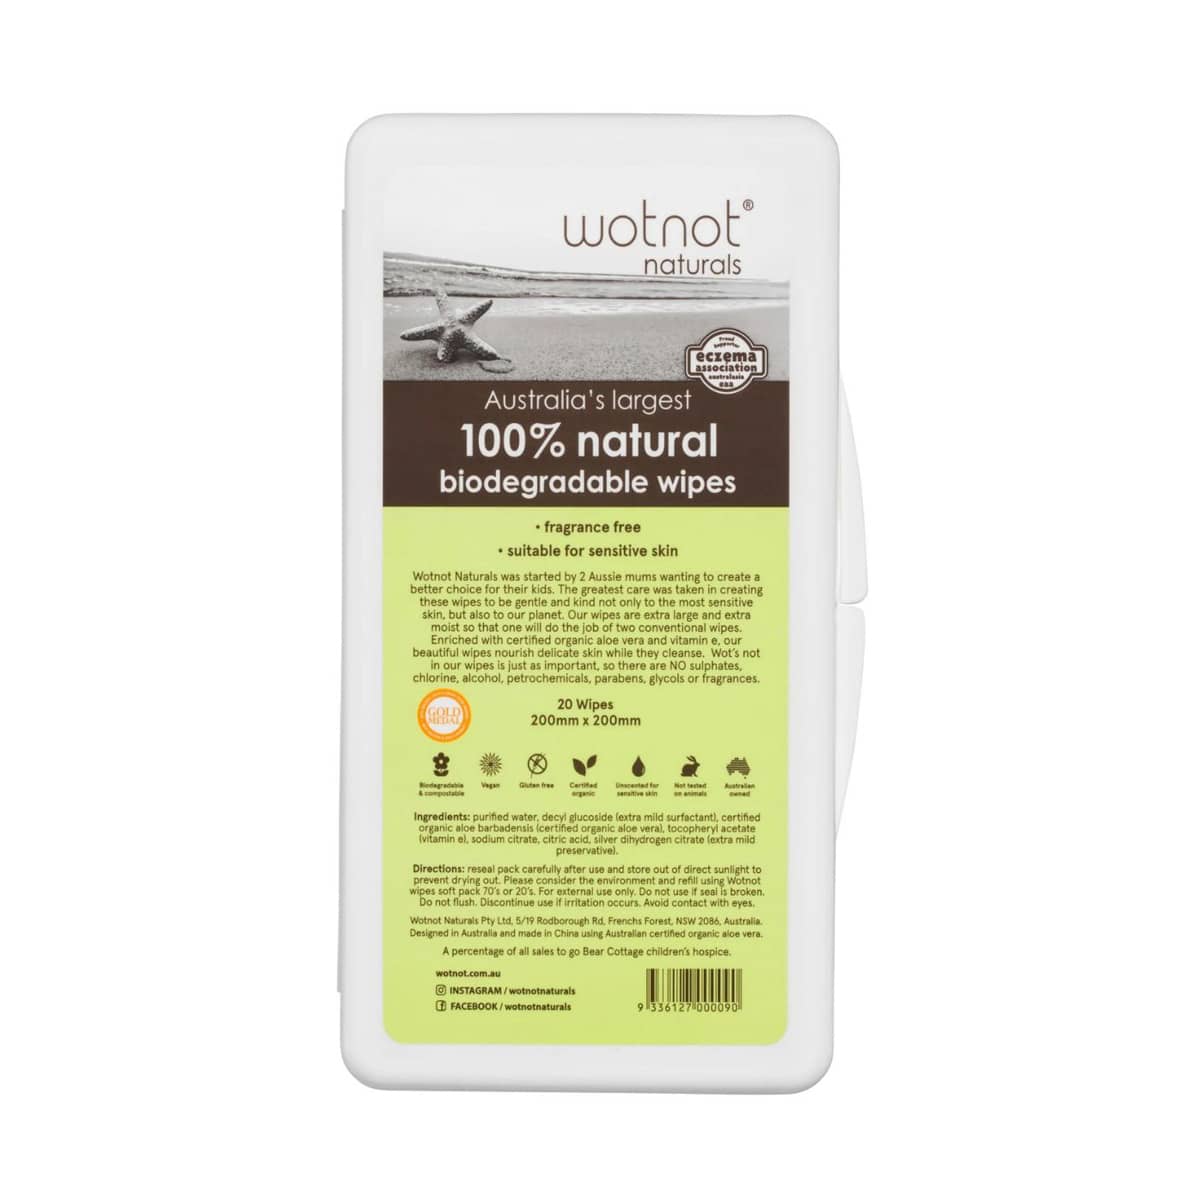 Wotnot Biodegradable Natural Baby Wipes - Travel Case